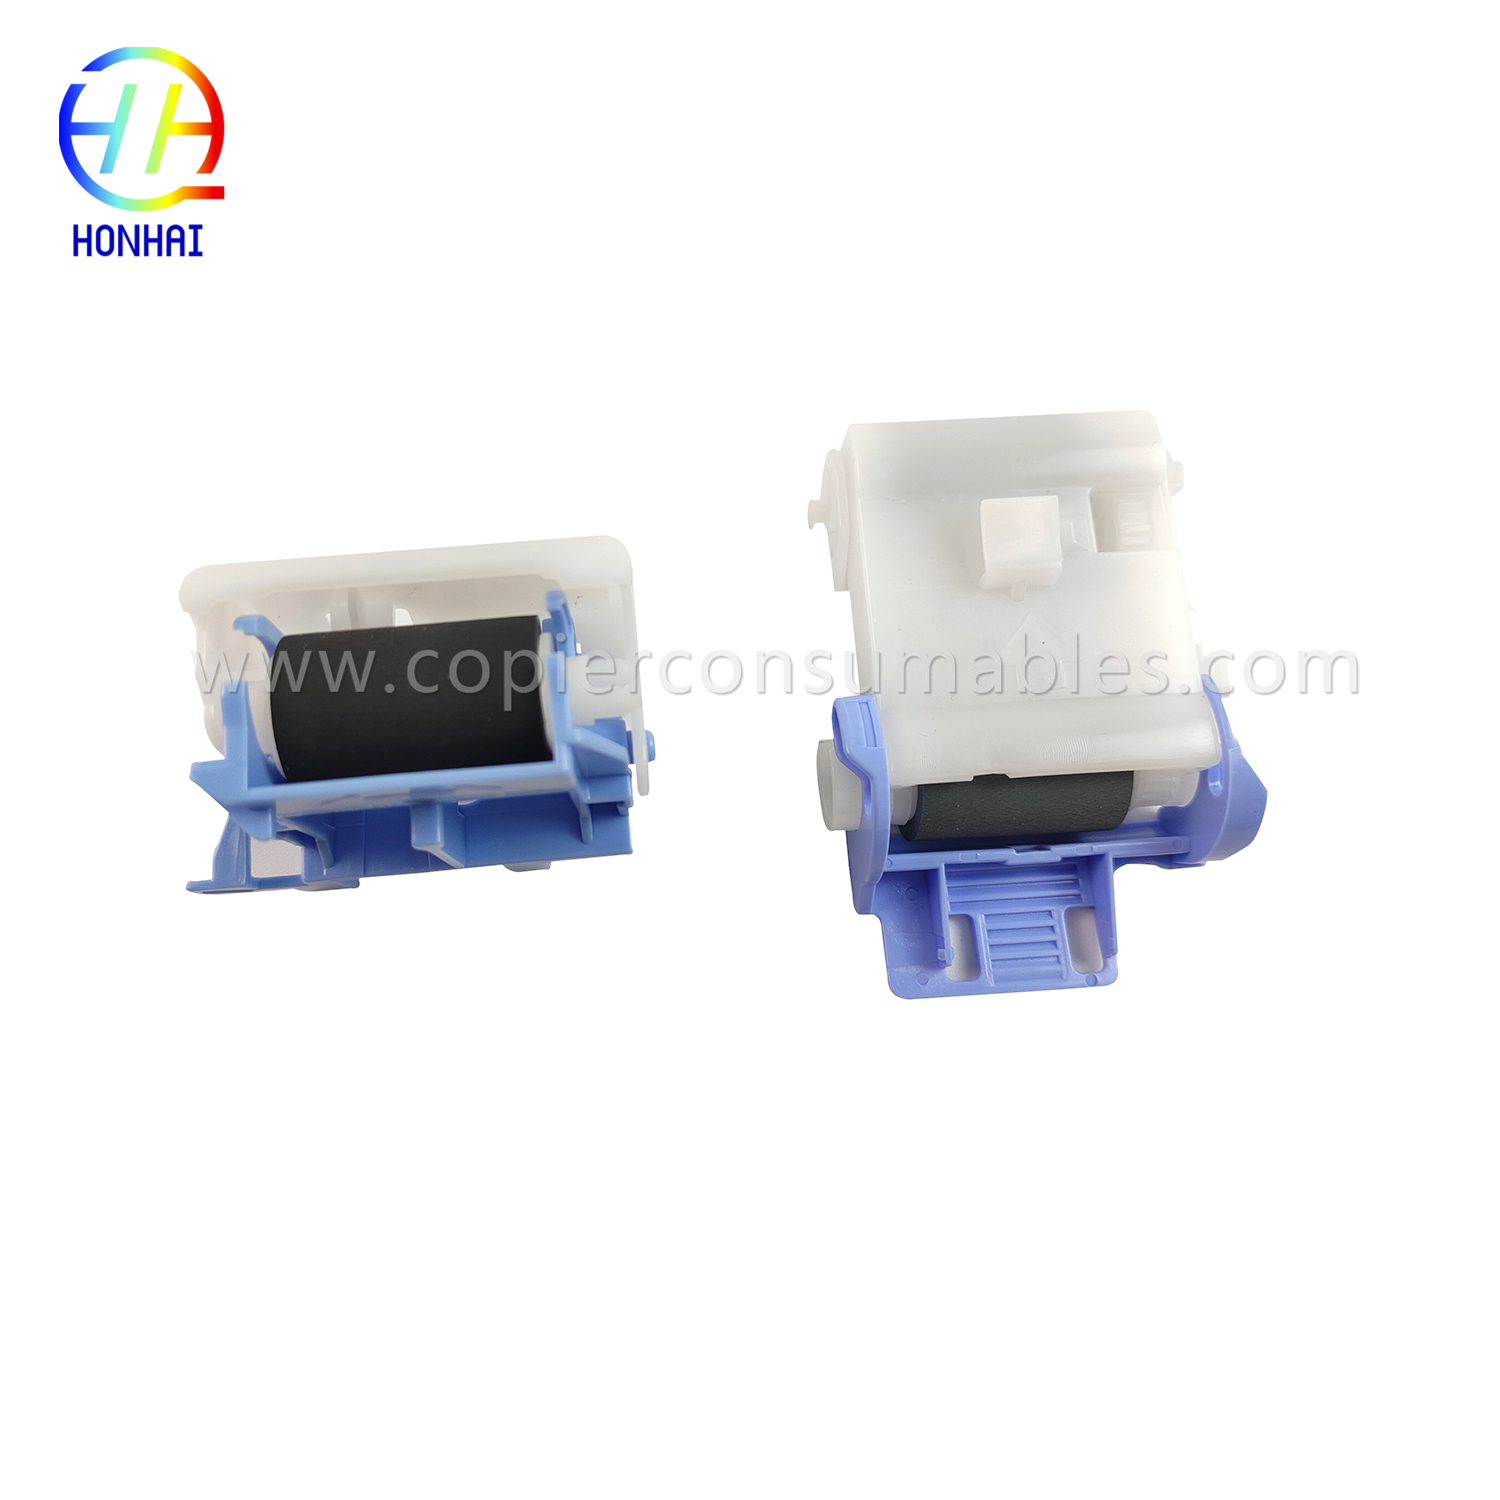 Separation-&-Pickup-Feed-Assemblies,-Tray-2-for-HP-Laserjet-Enterprise-M607,-Laserjet-Enterprise-M608,-M609,-M631,-M632,-M633-J8J70-61904- )-(2) 拷贝